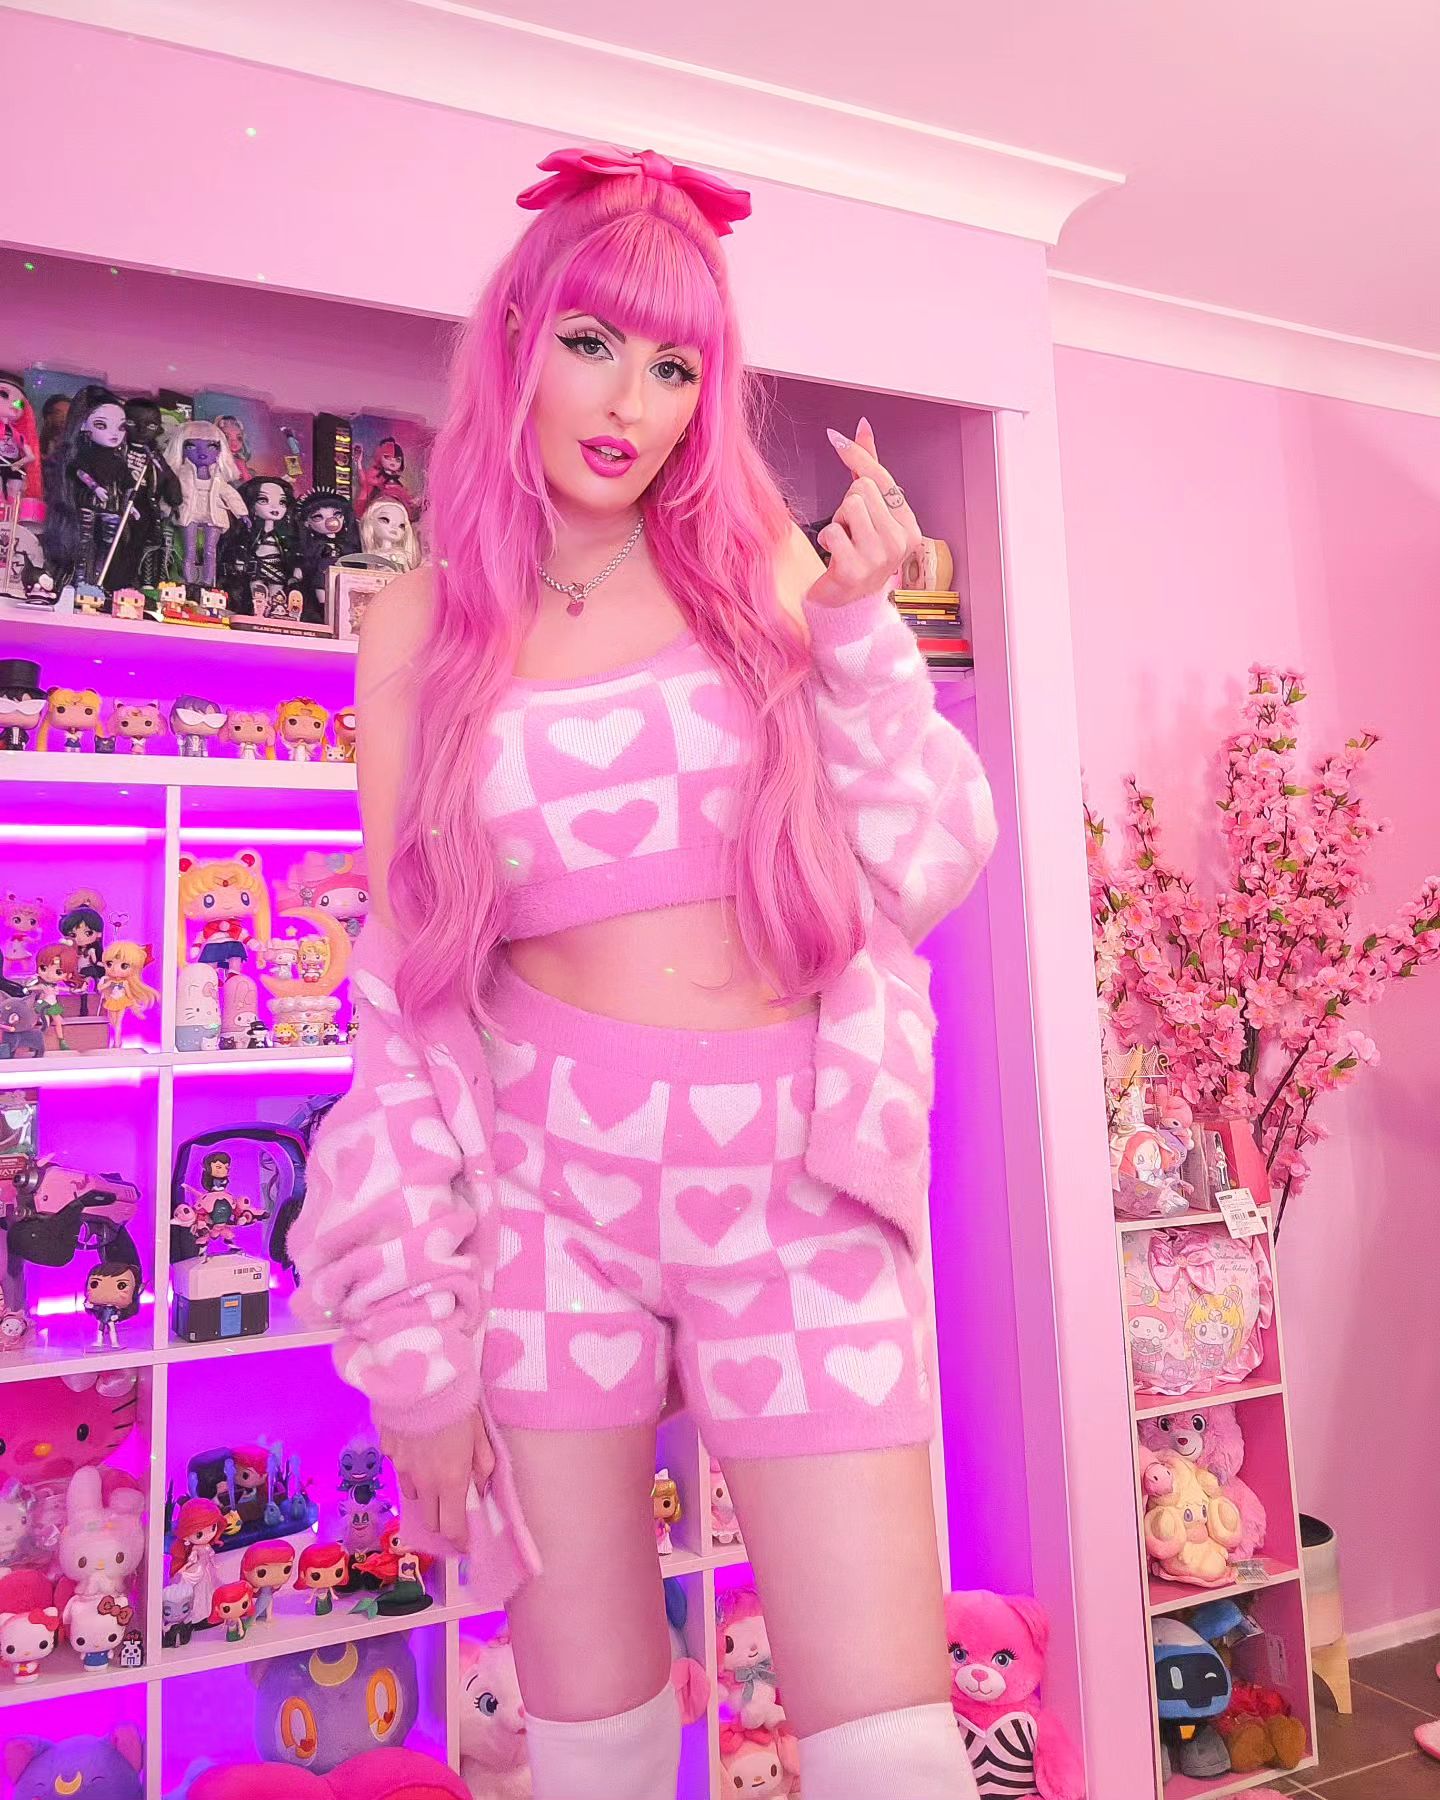 ♡I am so excited to announce that I am an official creator at @dreamhackau !!!!♡
I will be there all 3 days in Melbourne and I can't wait to see you all there and catch some live League of Legends♥︎
This is such a big deal for me as its my first time as an official creator🩷 
Who will I be seeing there? 
I've been jumping around with excitement all week! 

#dreamhack #gamer #gamergirl #egirl #announcement #excited #pink #egirl #streamer #Twitch